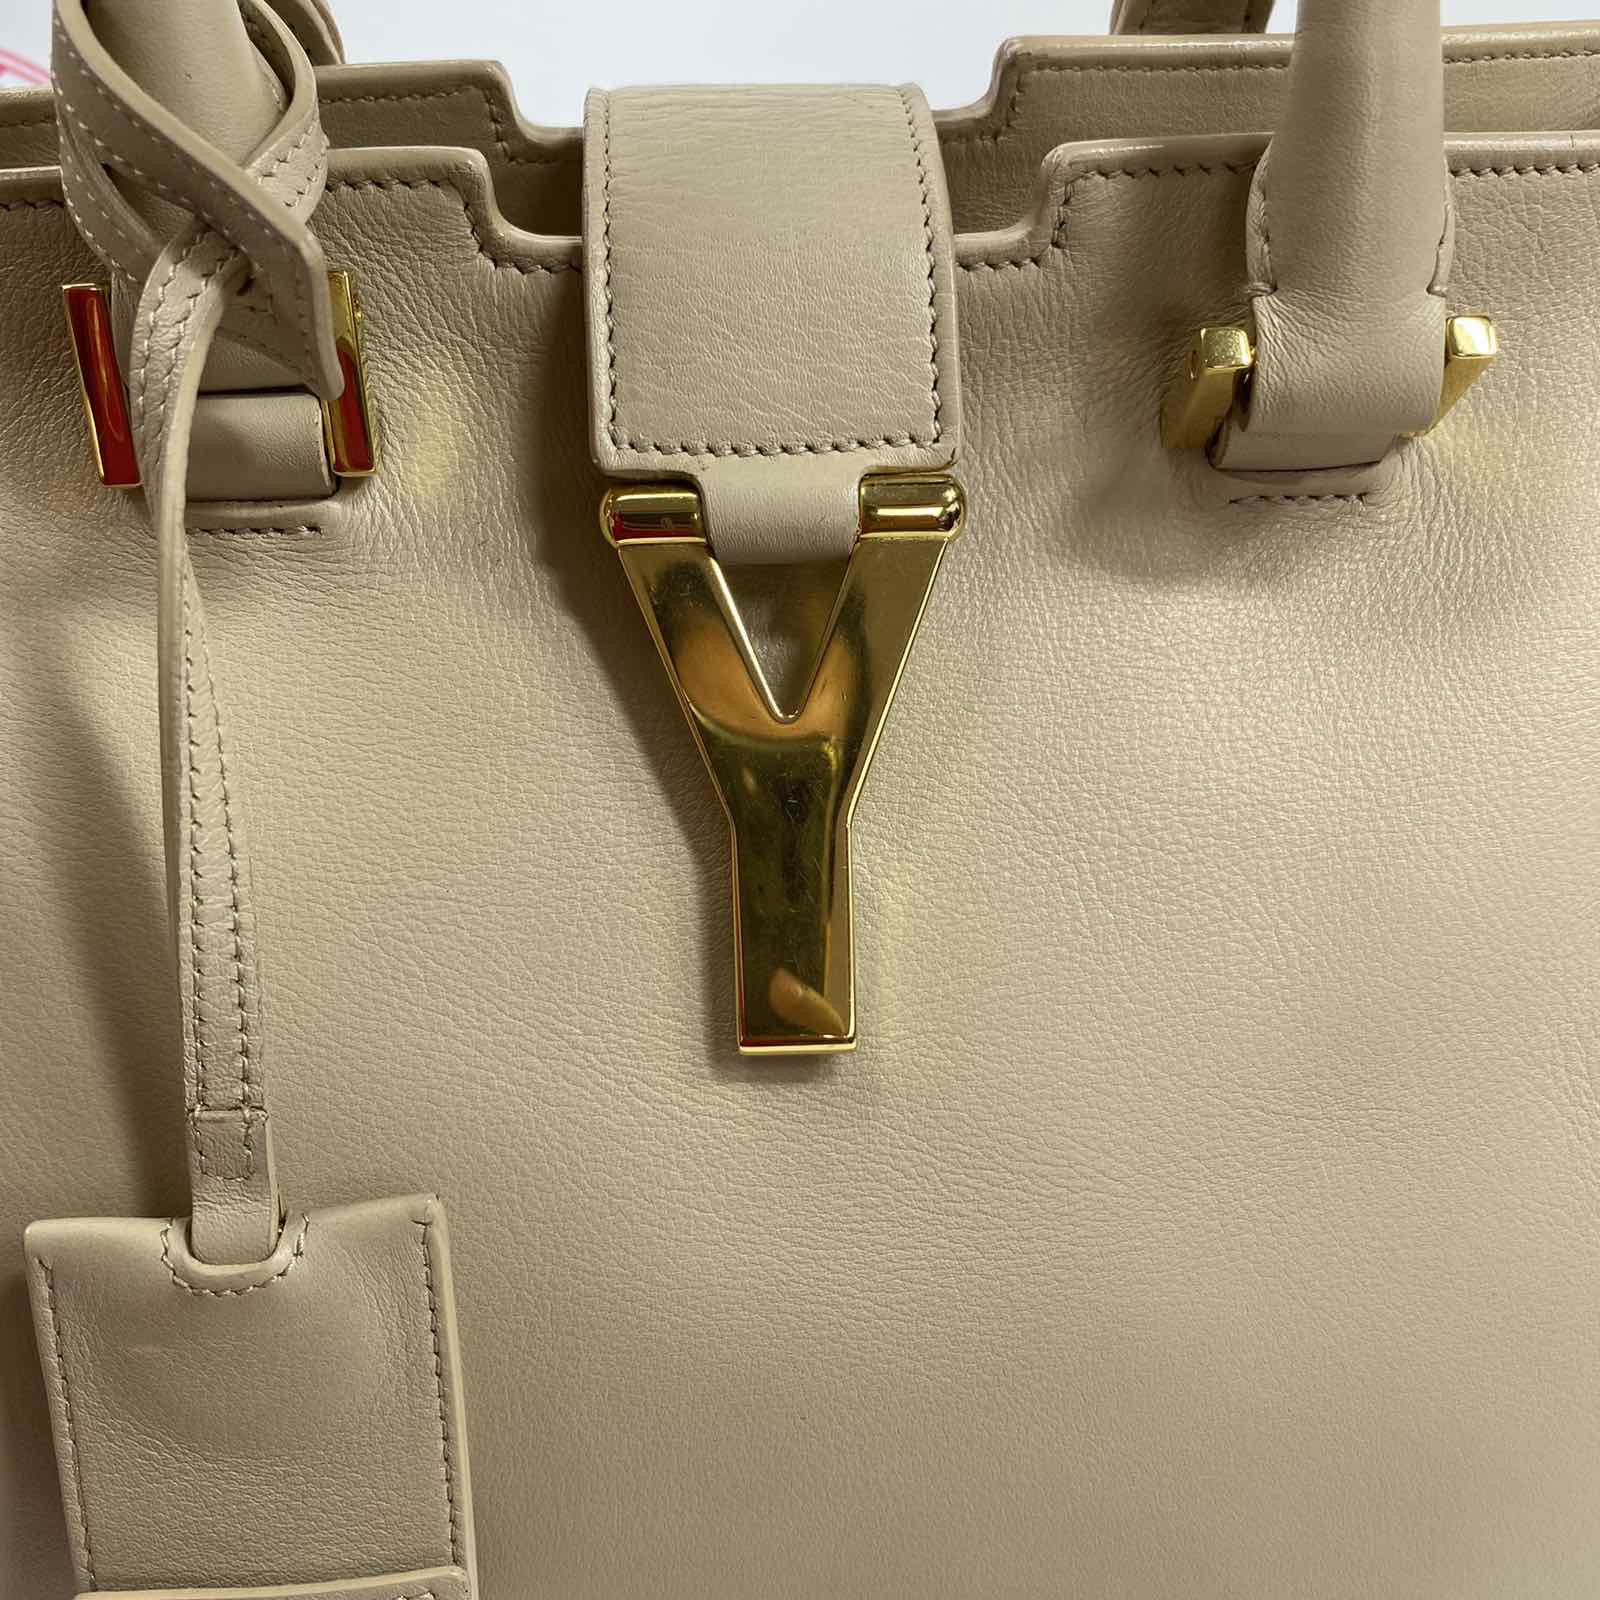 YSL Chyc Cabas Small Beige leather two way bag. Made in Italy